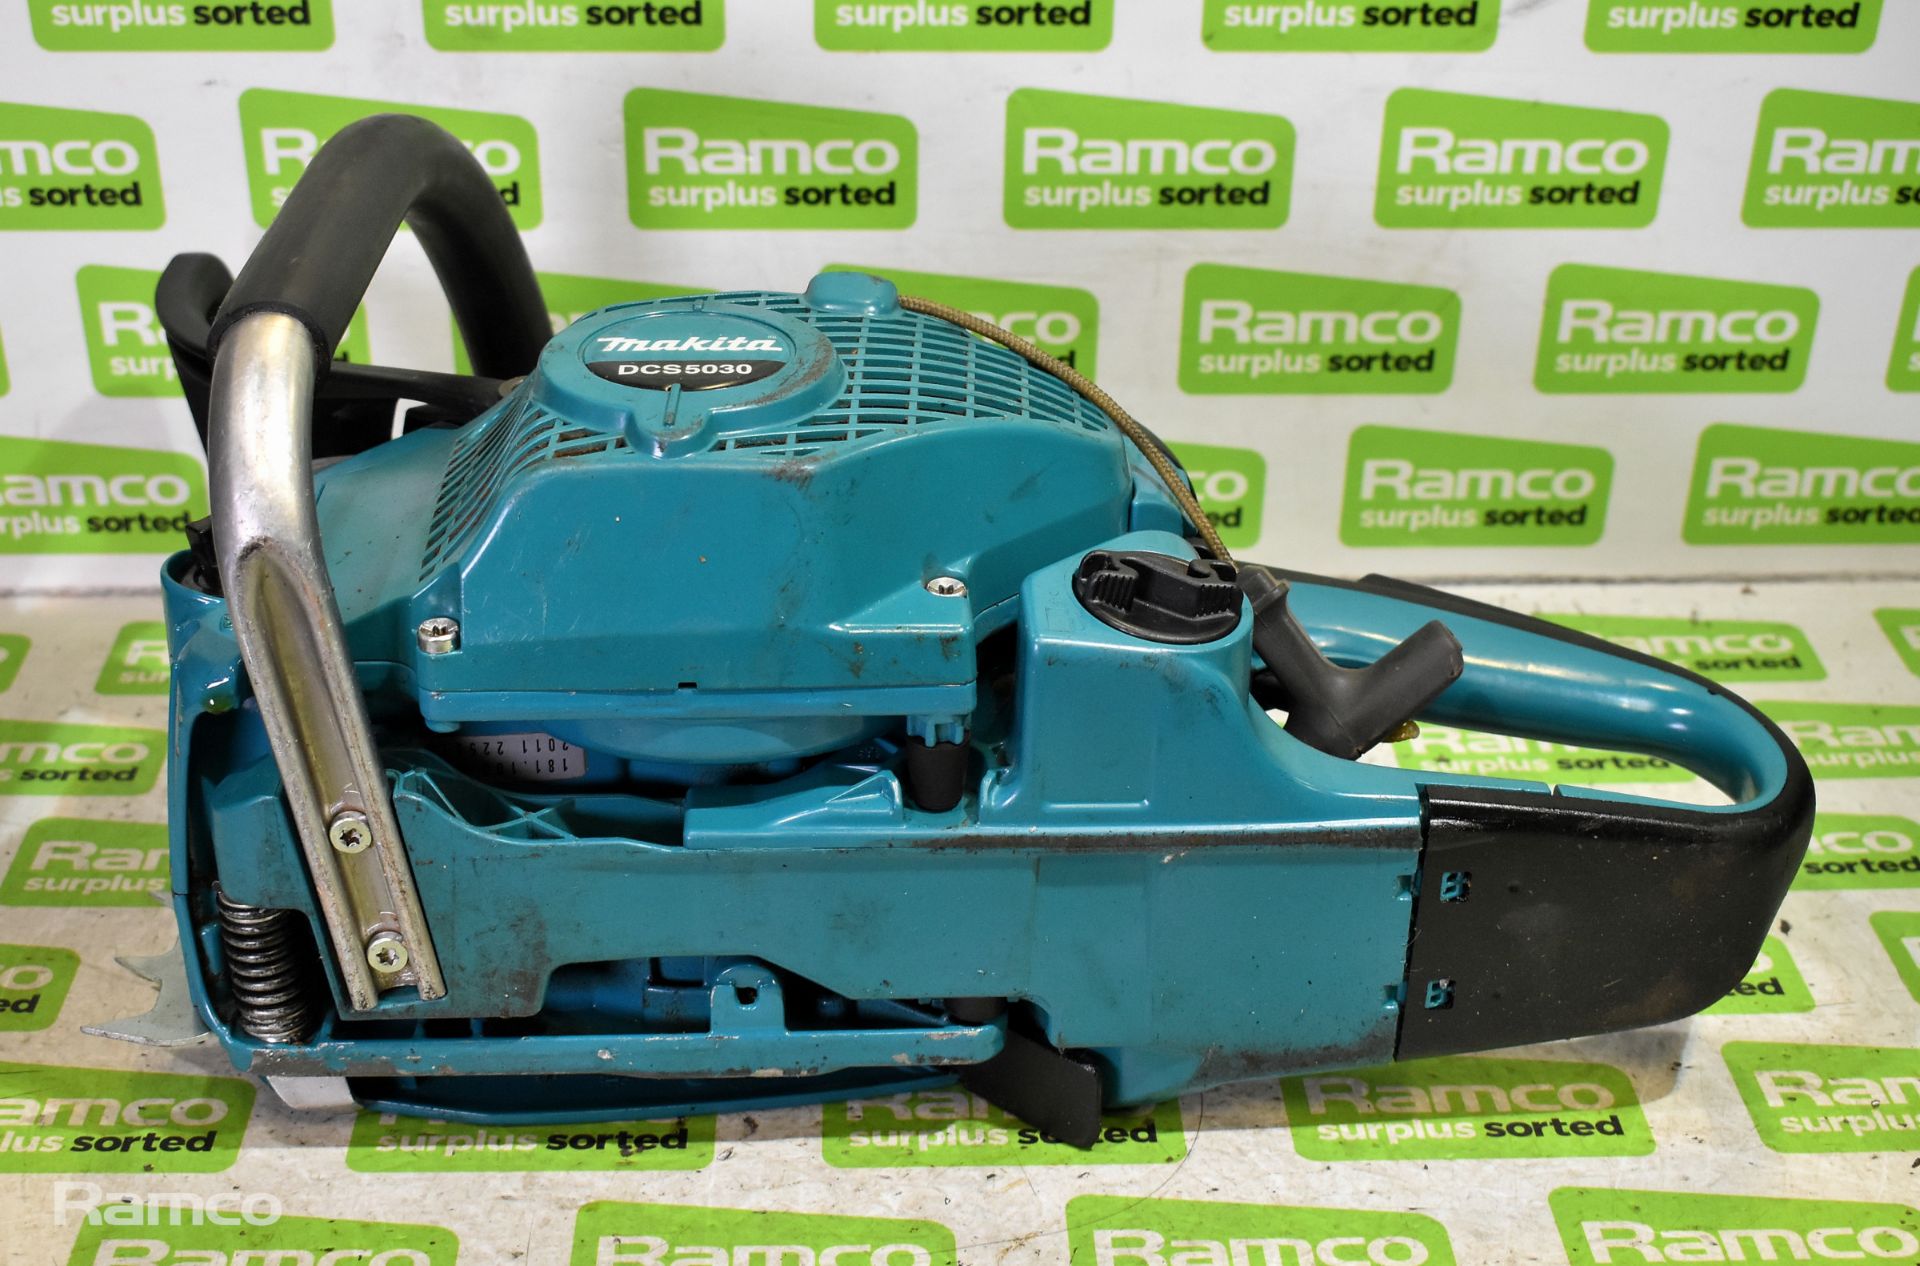 4x Makita DCS5030 50cc petrol chainsaws - BODIES ONLY - AS SPARES OR REPAIRS - Image 12 of 22